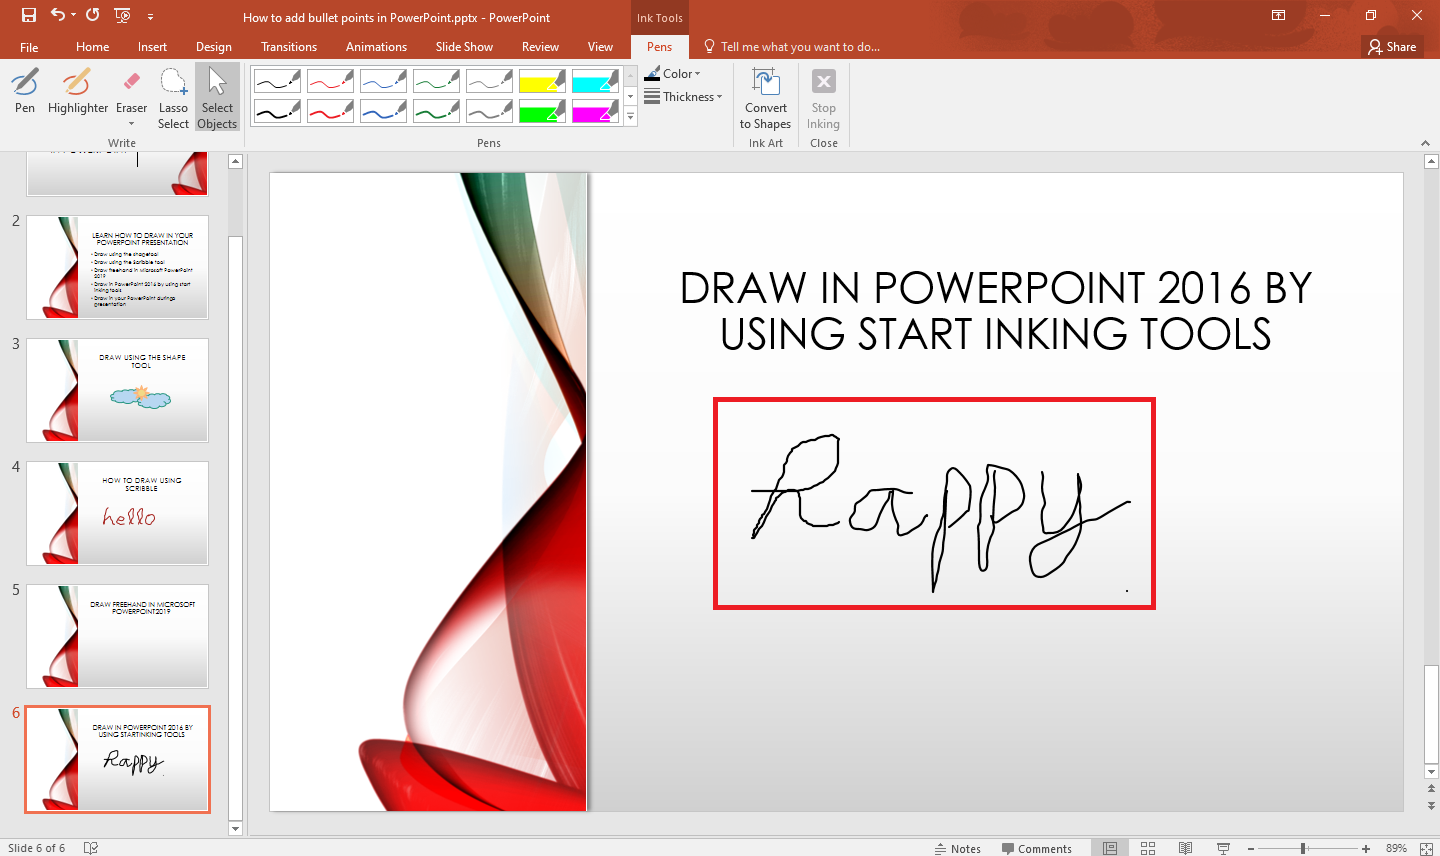 after you click it, you can now draw in a freeform tool on PowerPoint 2016.